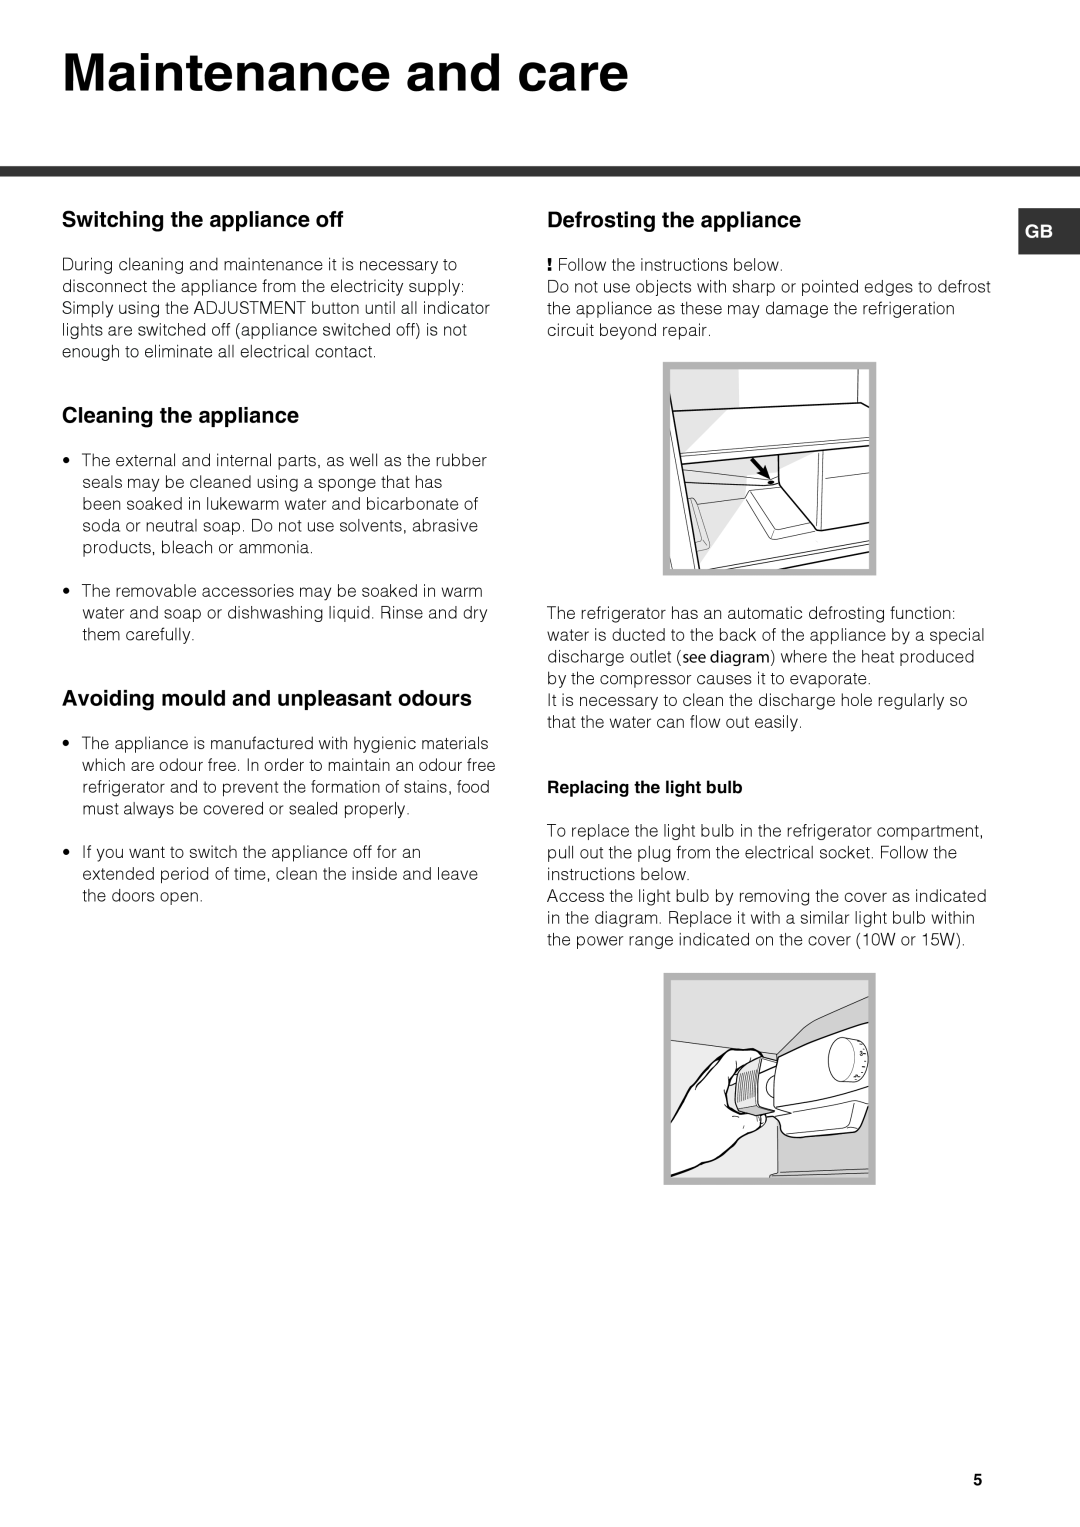 Hotpoint HS3022VL, KSF3022VL manual Maintenance and care, Defrosting the appliance 